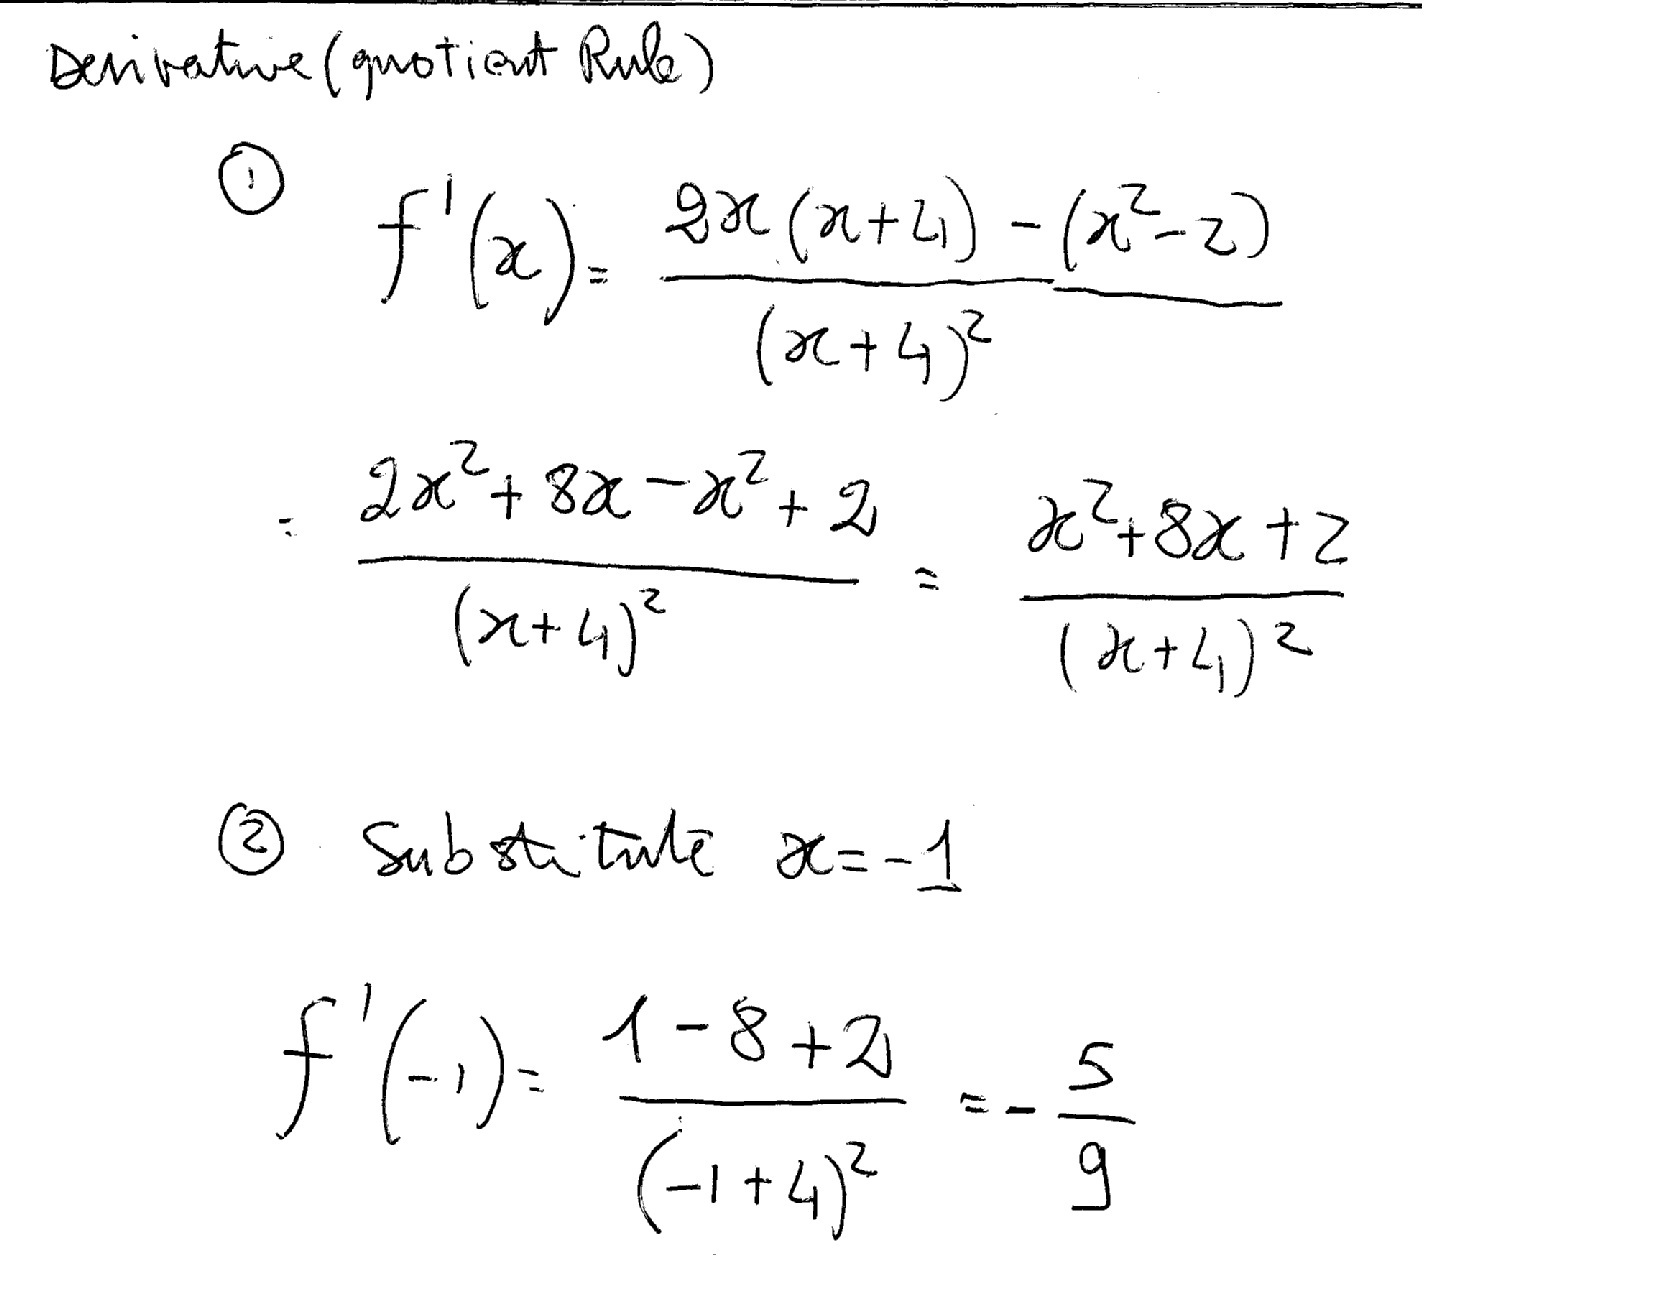 How do you find the instantaneous rate of change of f(x)=(x^8-8